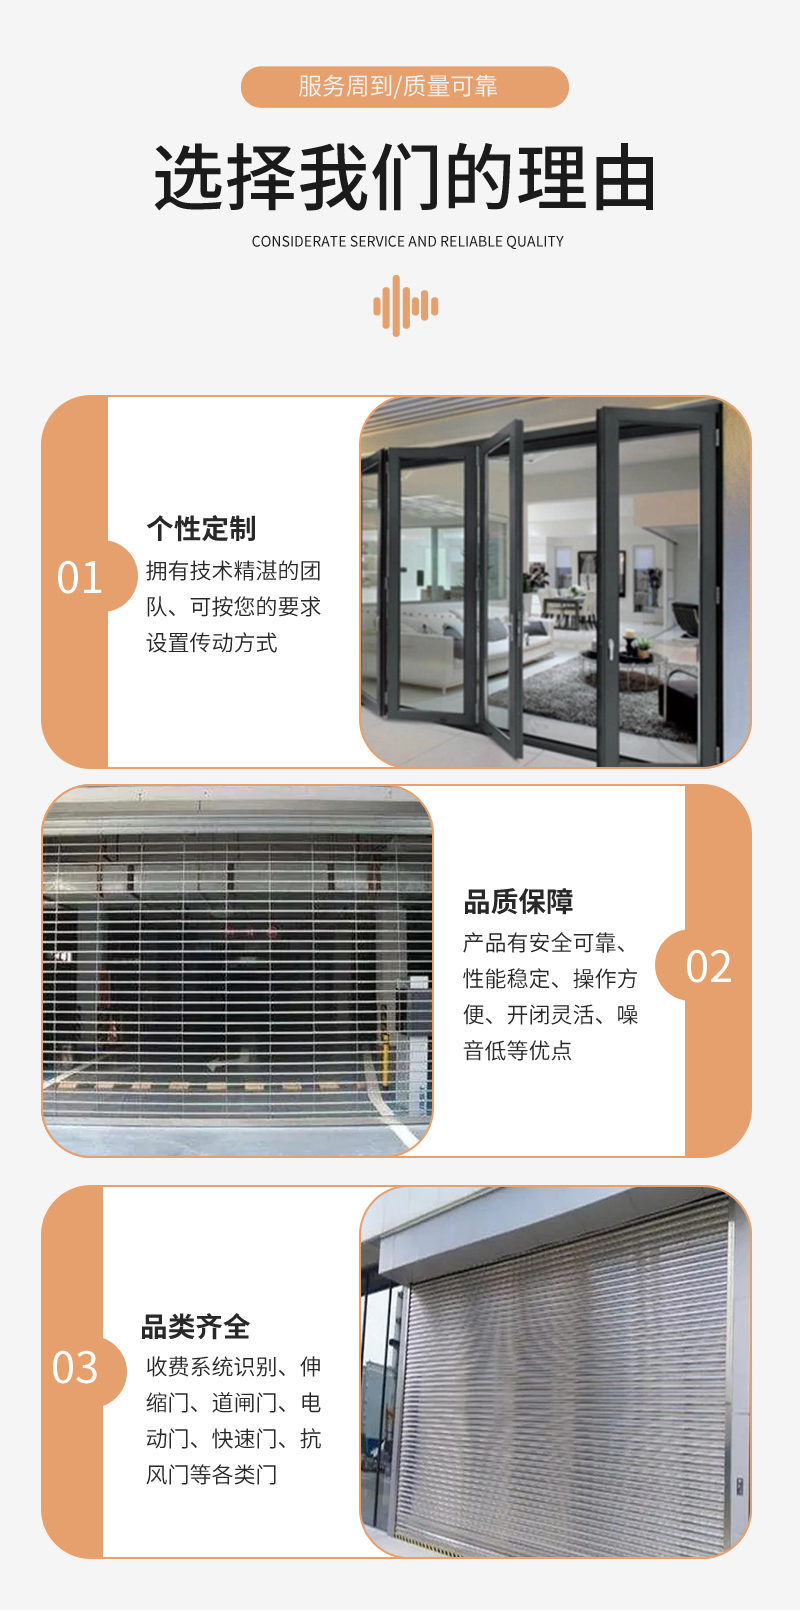 Jinqin intelligent remote control trackless door, thickened material, smooth appearance, one-stop service, and good reputation